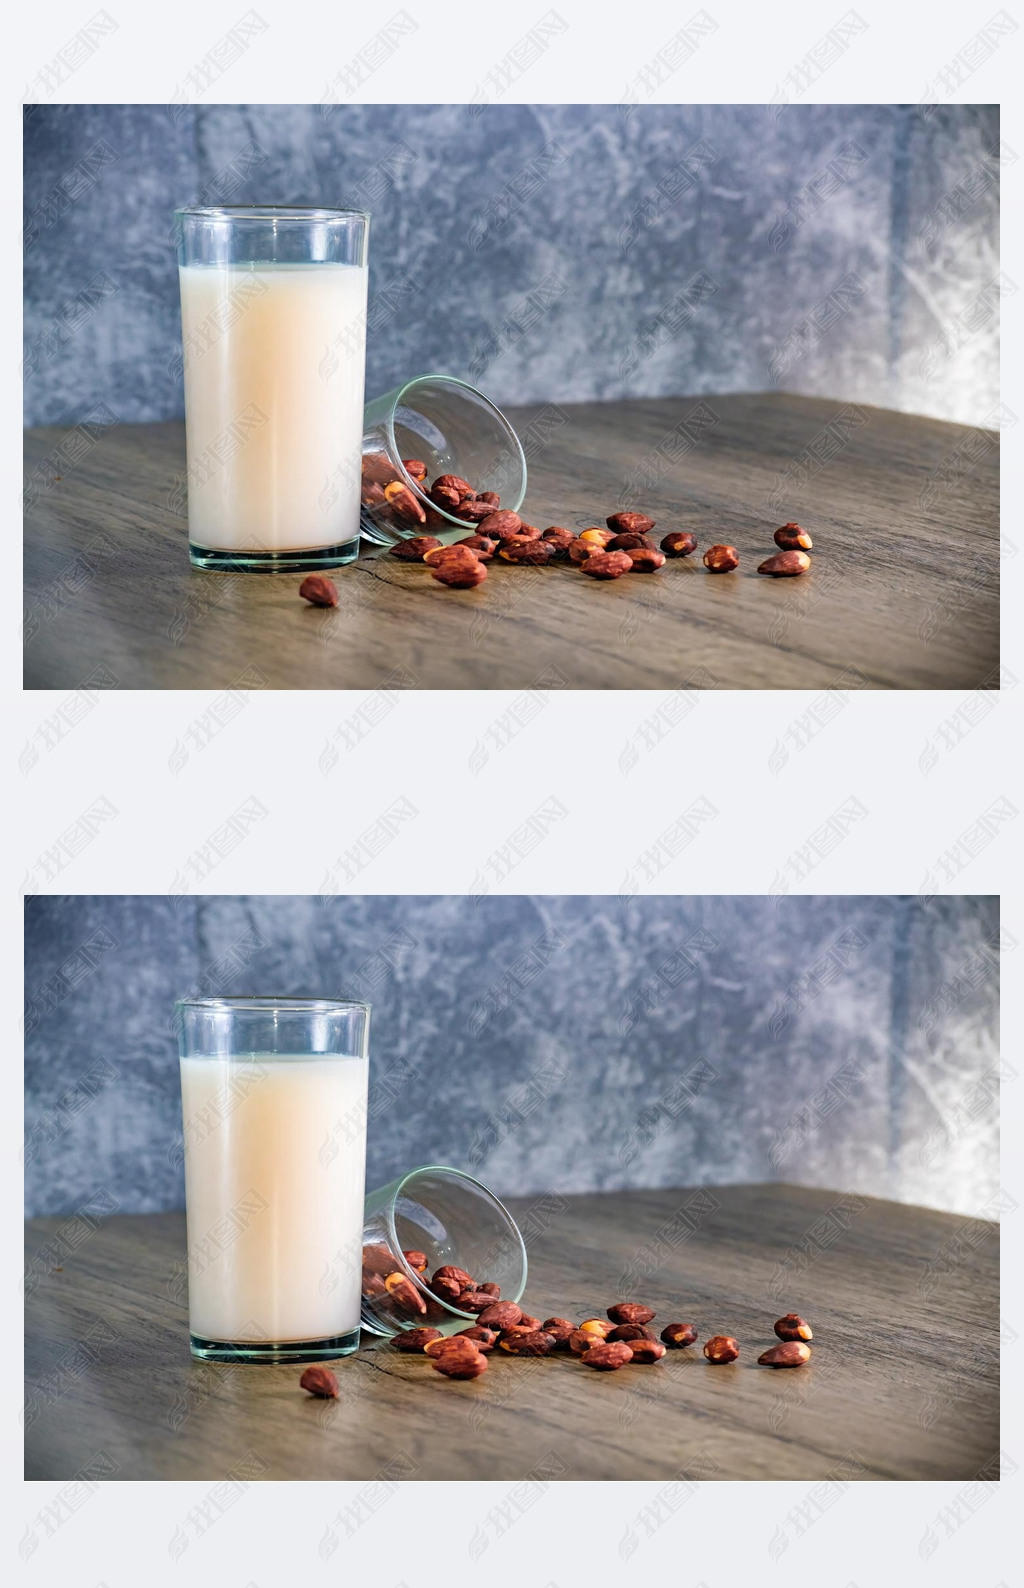 Almond milk with almond on a wooden table and background is bare cement walls